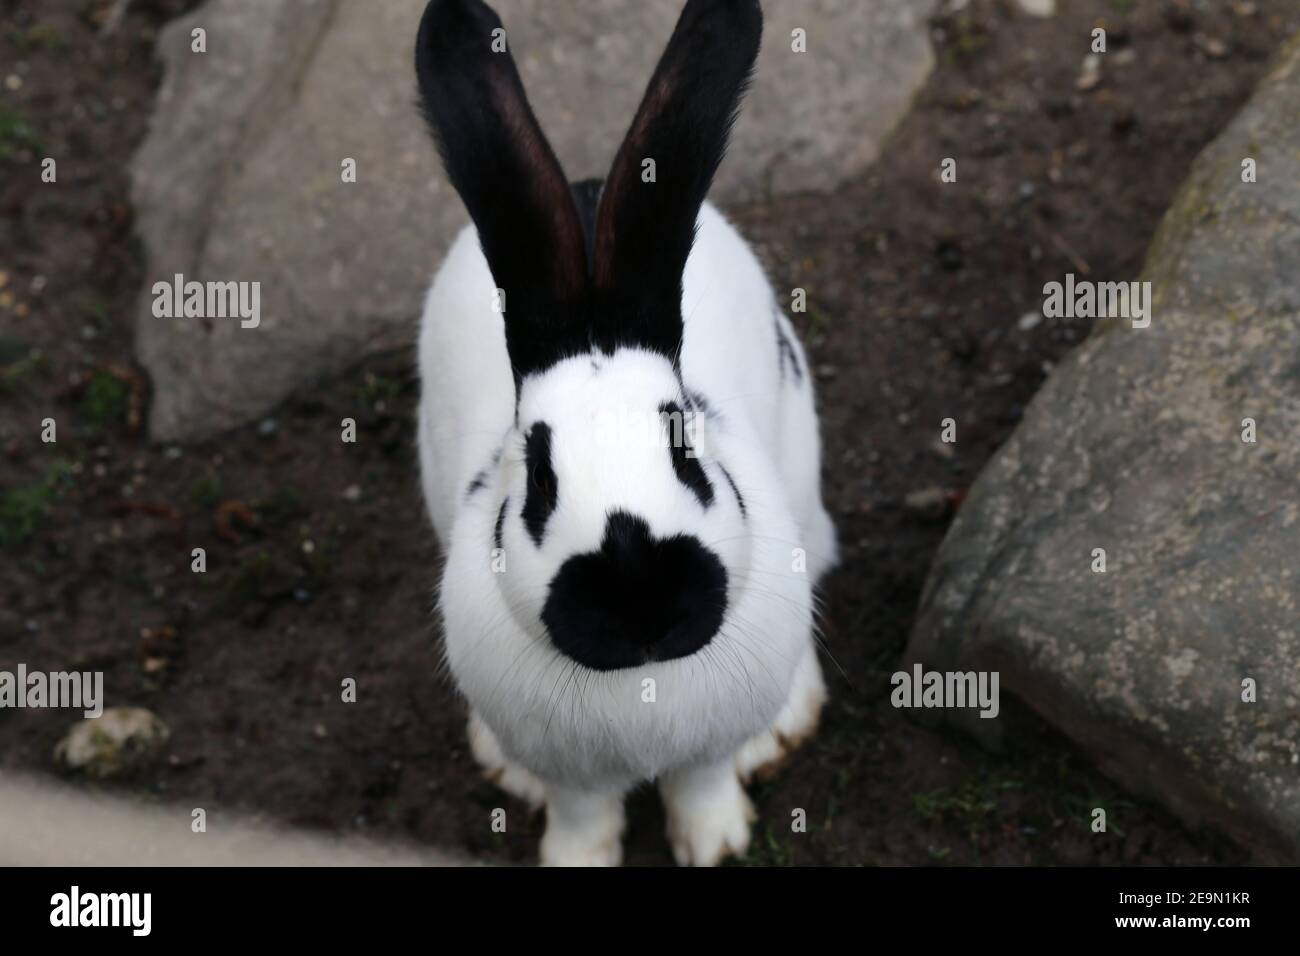 Cute black and white colored rabbit with some black dots and black parts. Adorable and fluffy pet photographed outdoors in a park on a sunny day. Stock Photo